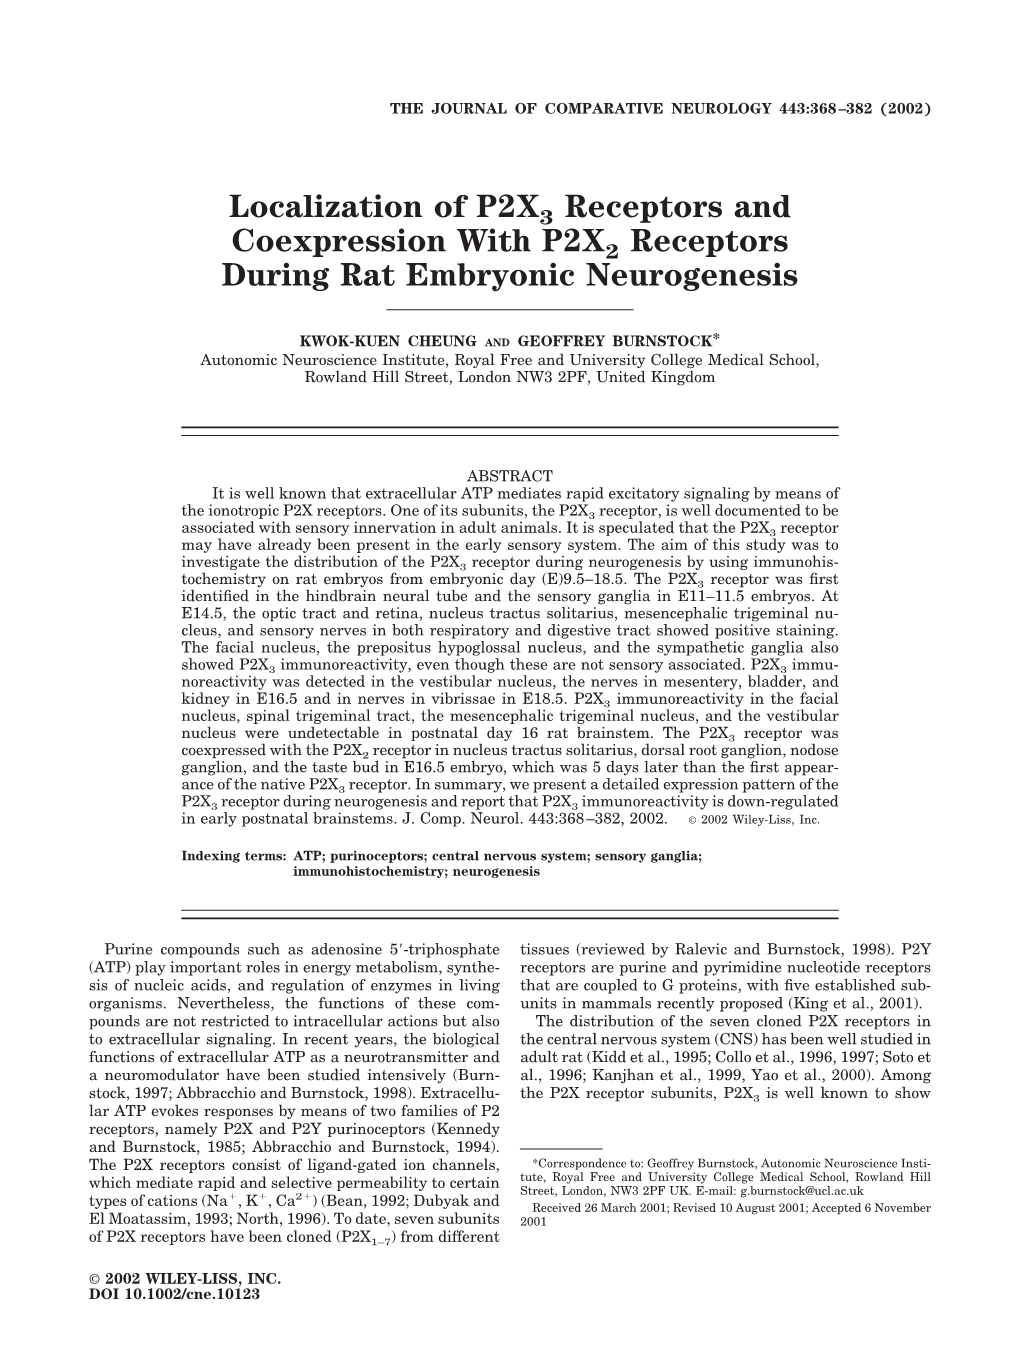 Localization of P2X3 Receptors and Coexpression with P2X2 Receptors During Rat Embryonic Neurogenesis